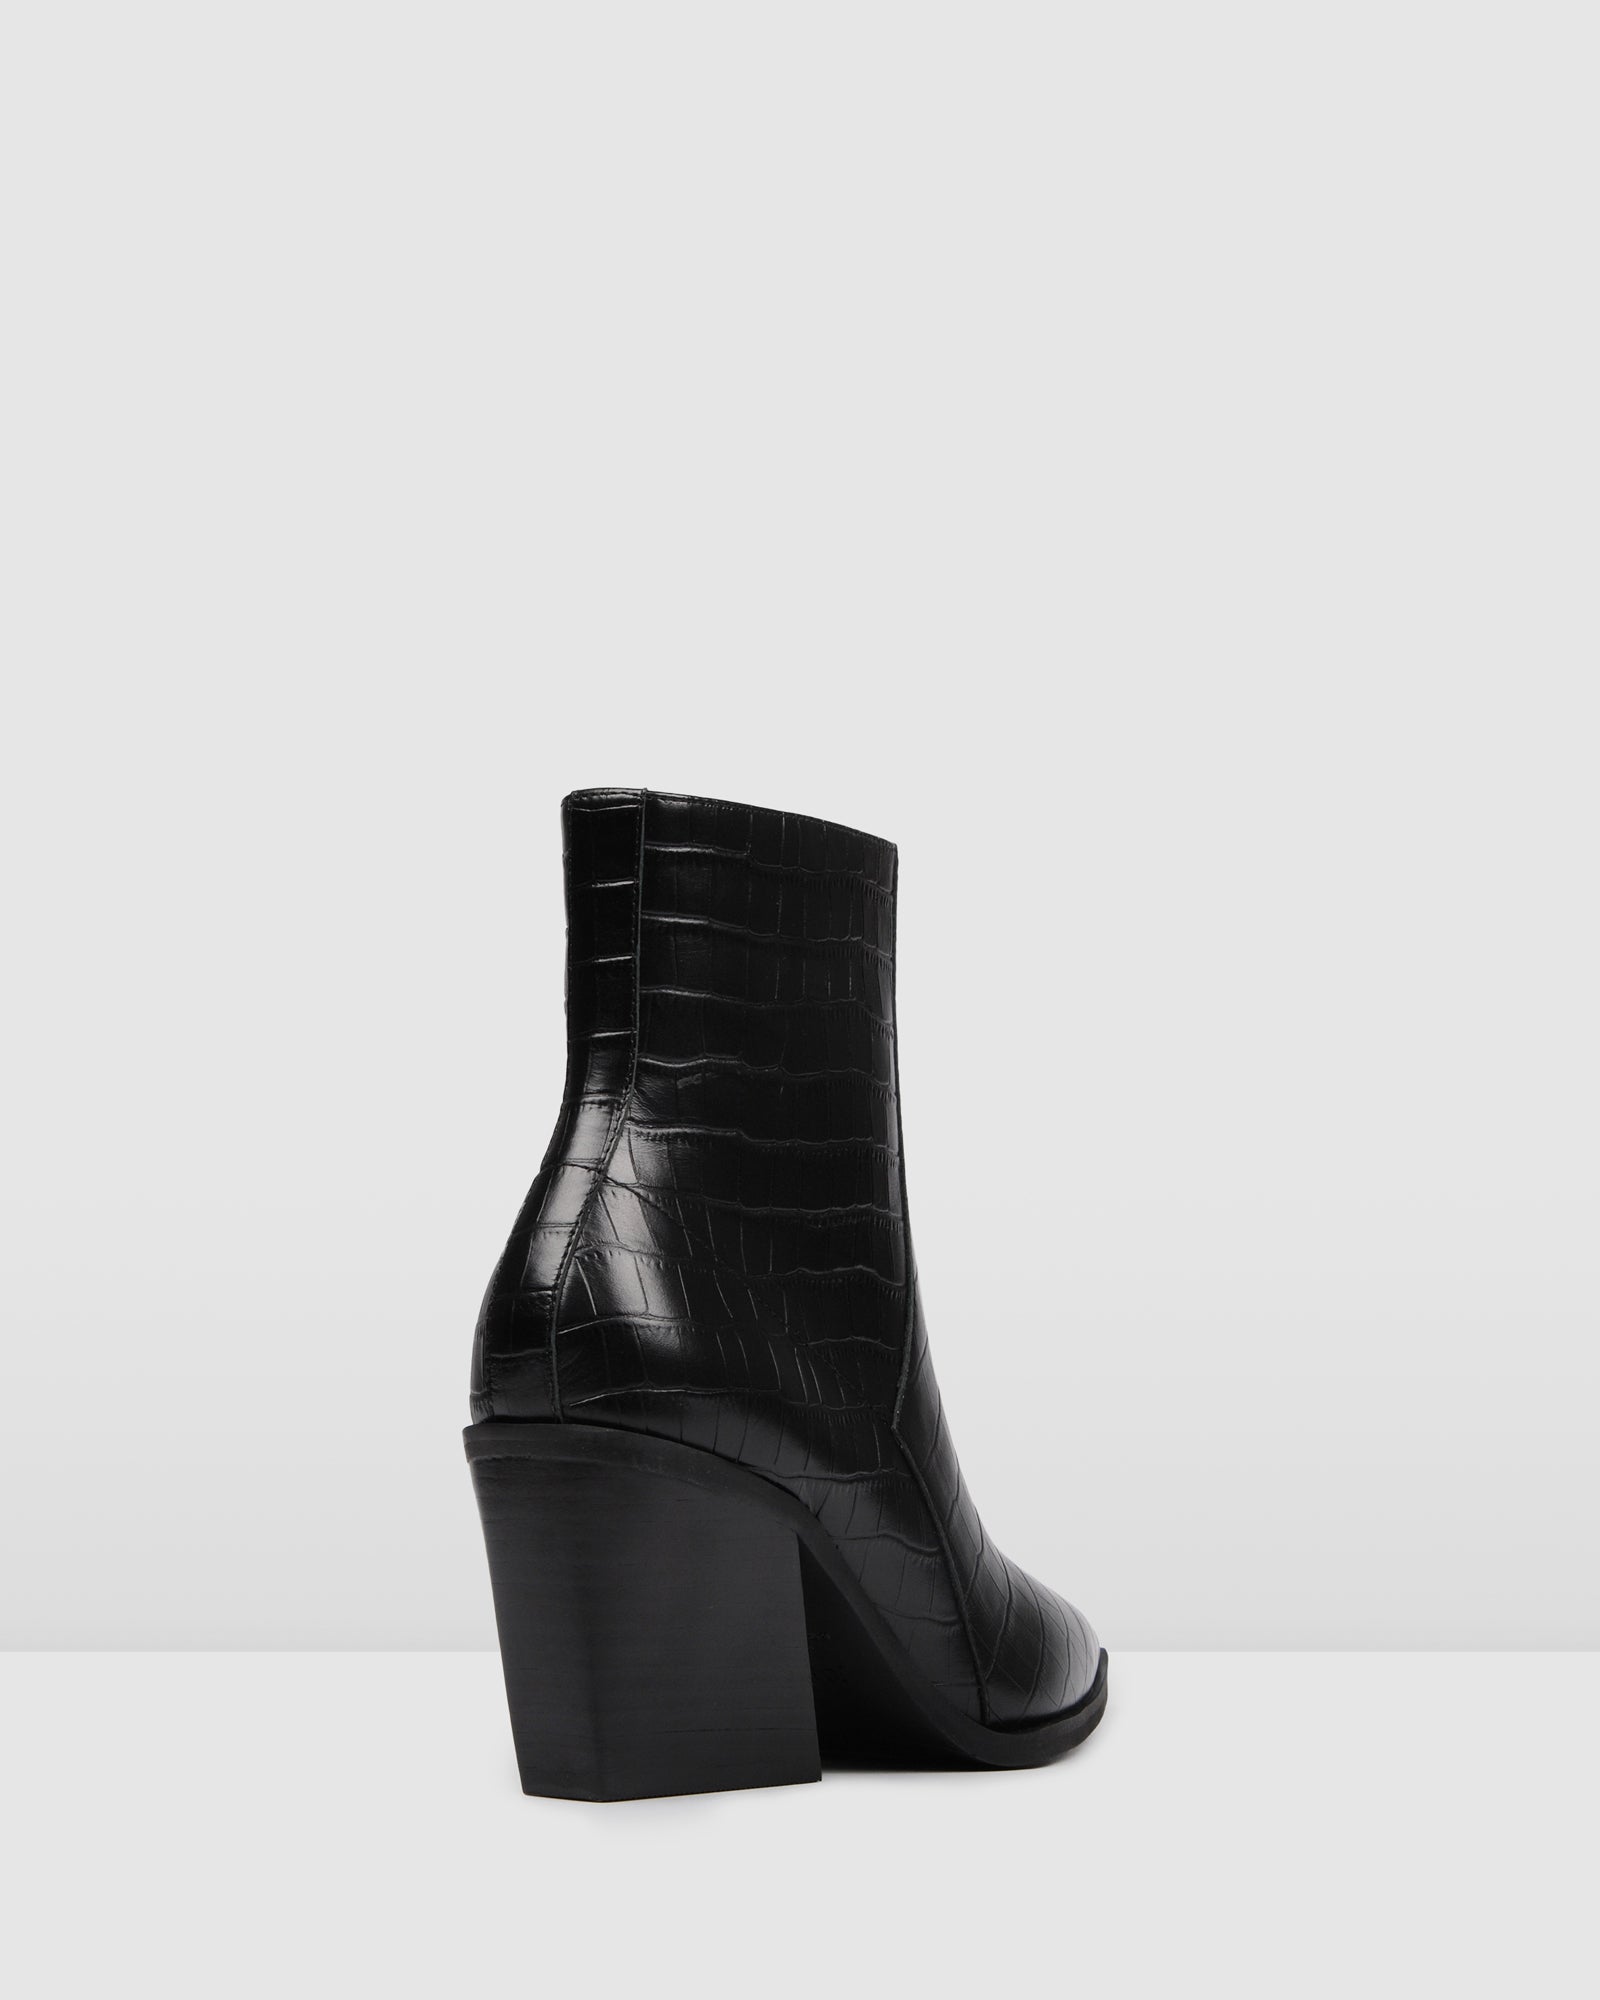 croc skin ankle boots